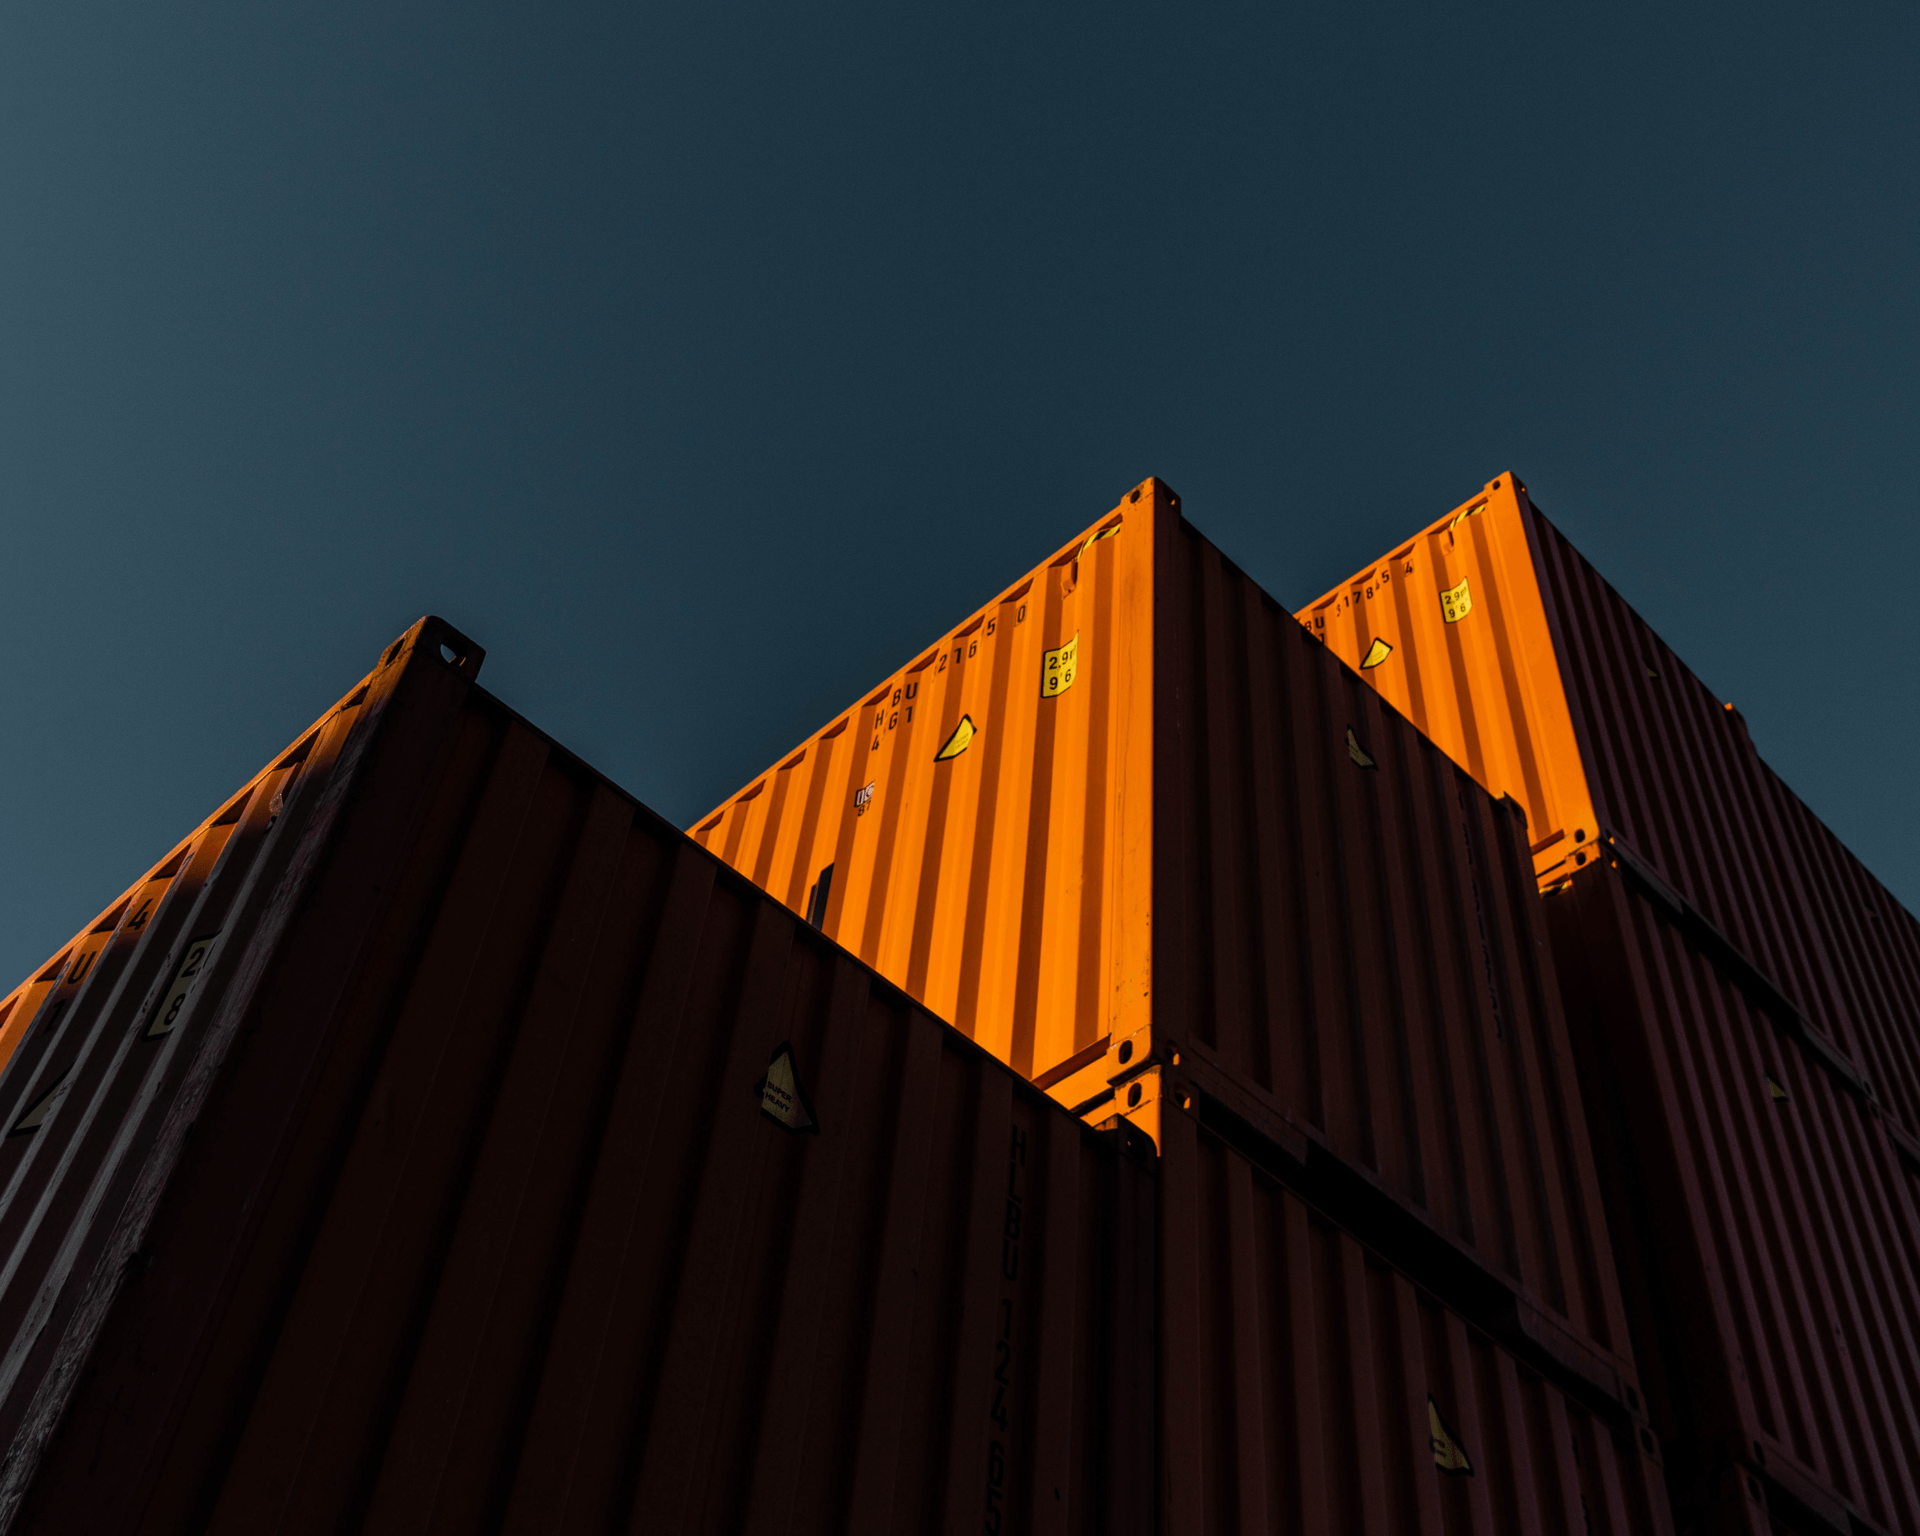 Orange containers seen from below with a dark blue sky as a background